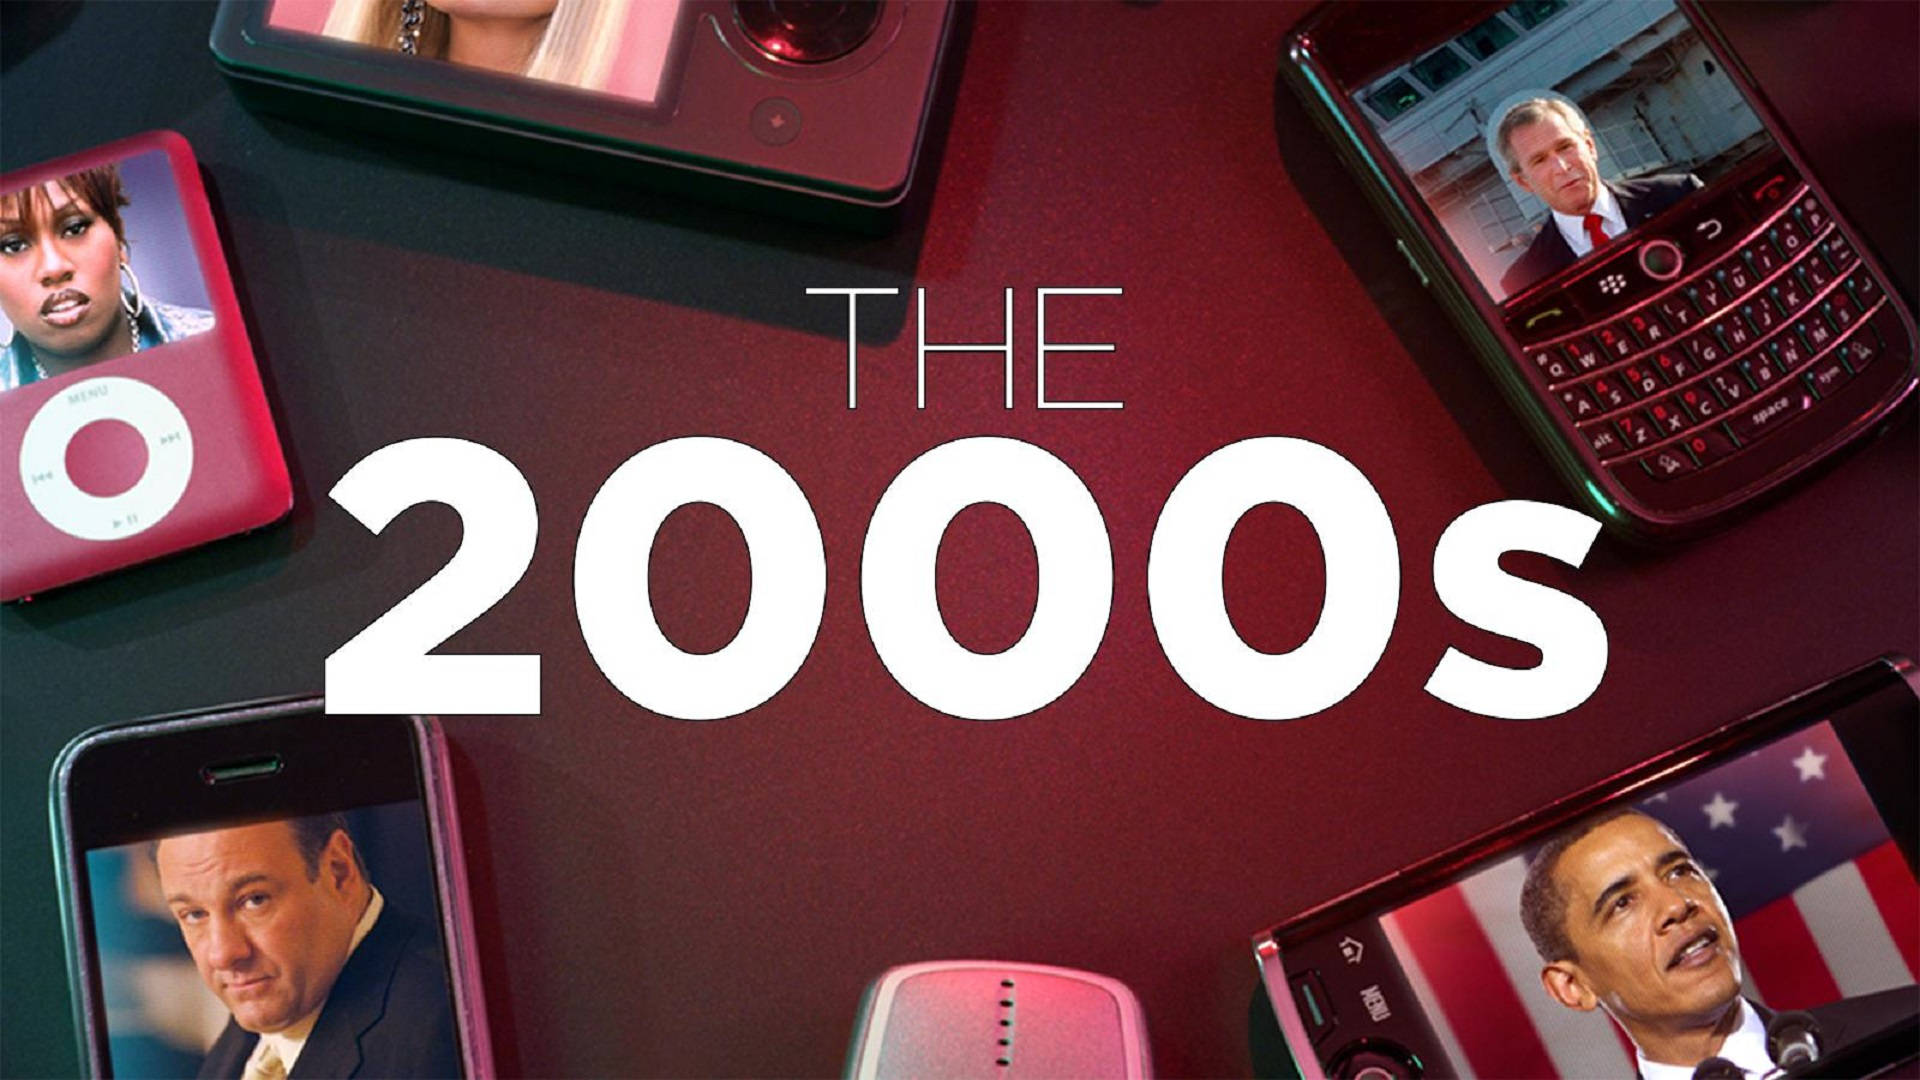 Cnn The 2000s Cover